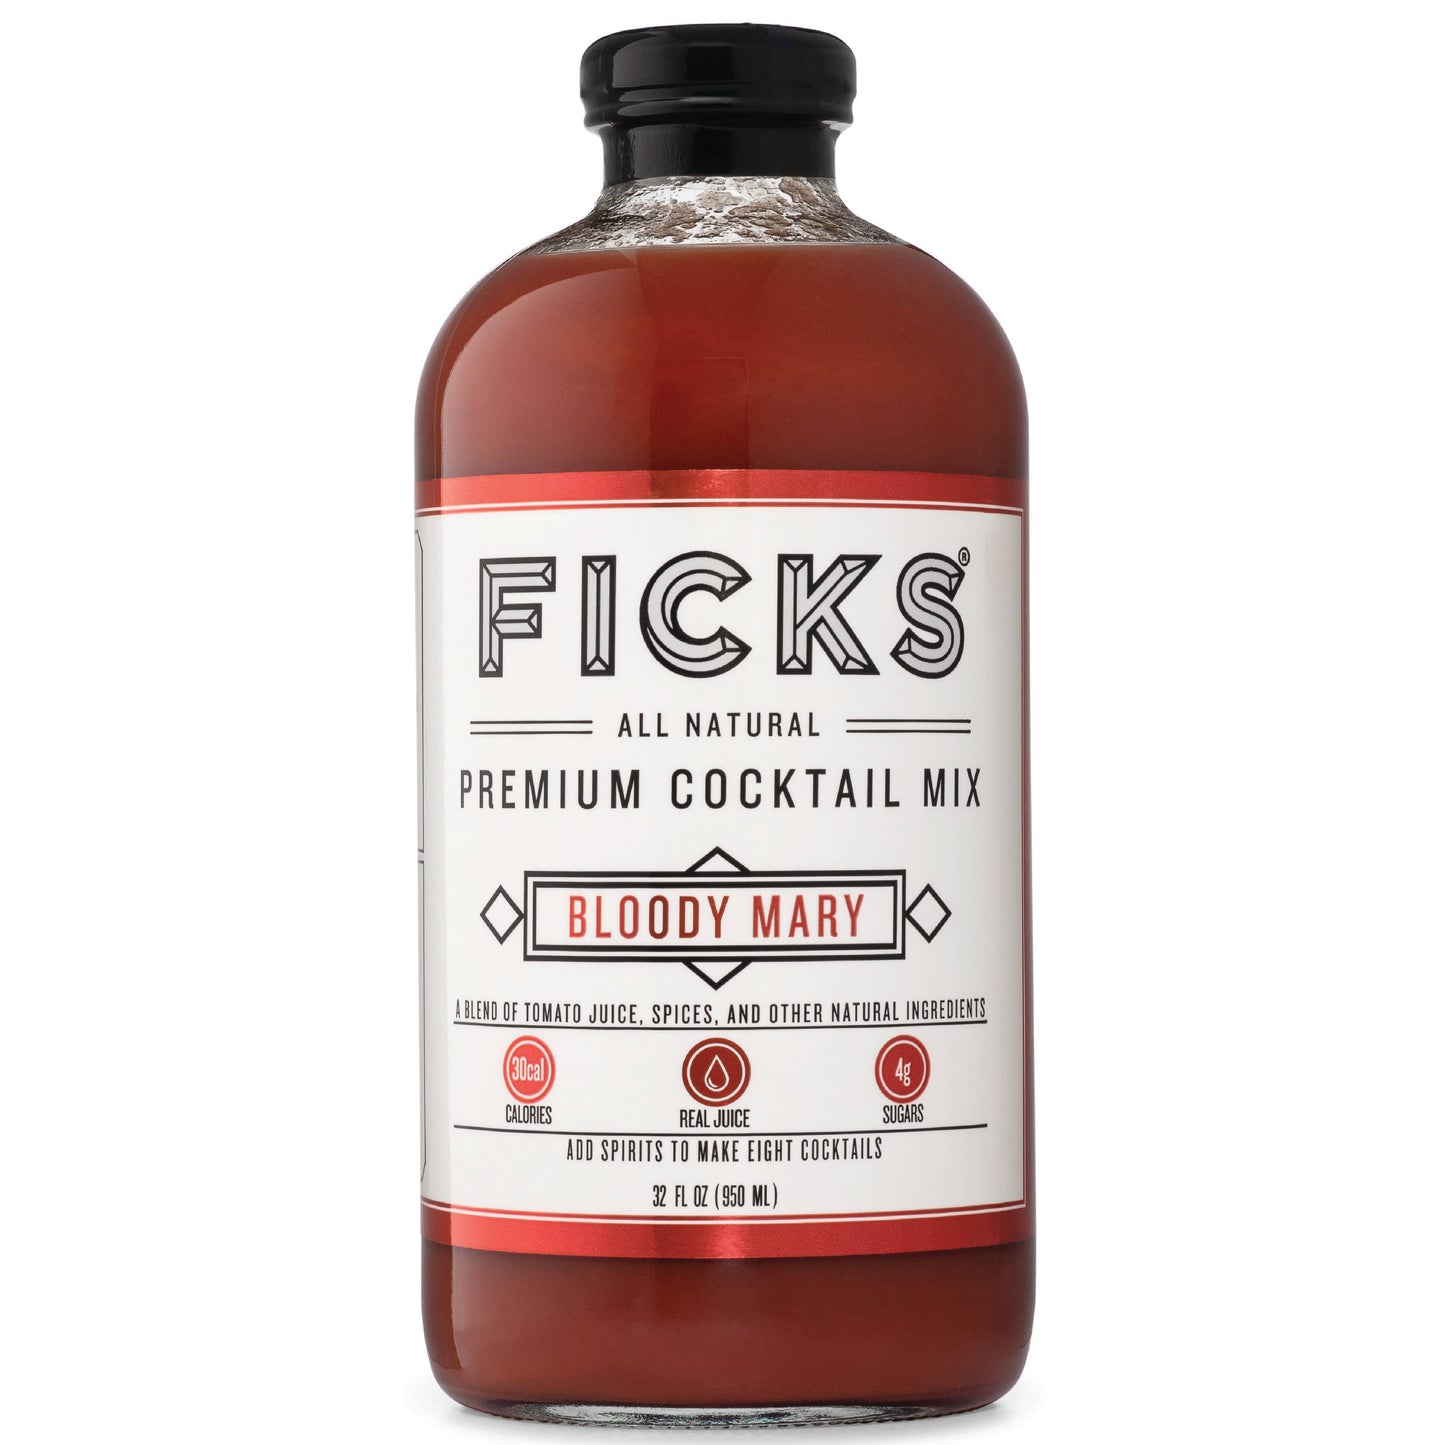 FICKS Premium Bloody Mary Cocktail Mix